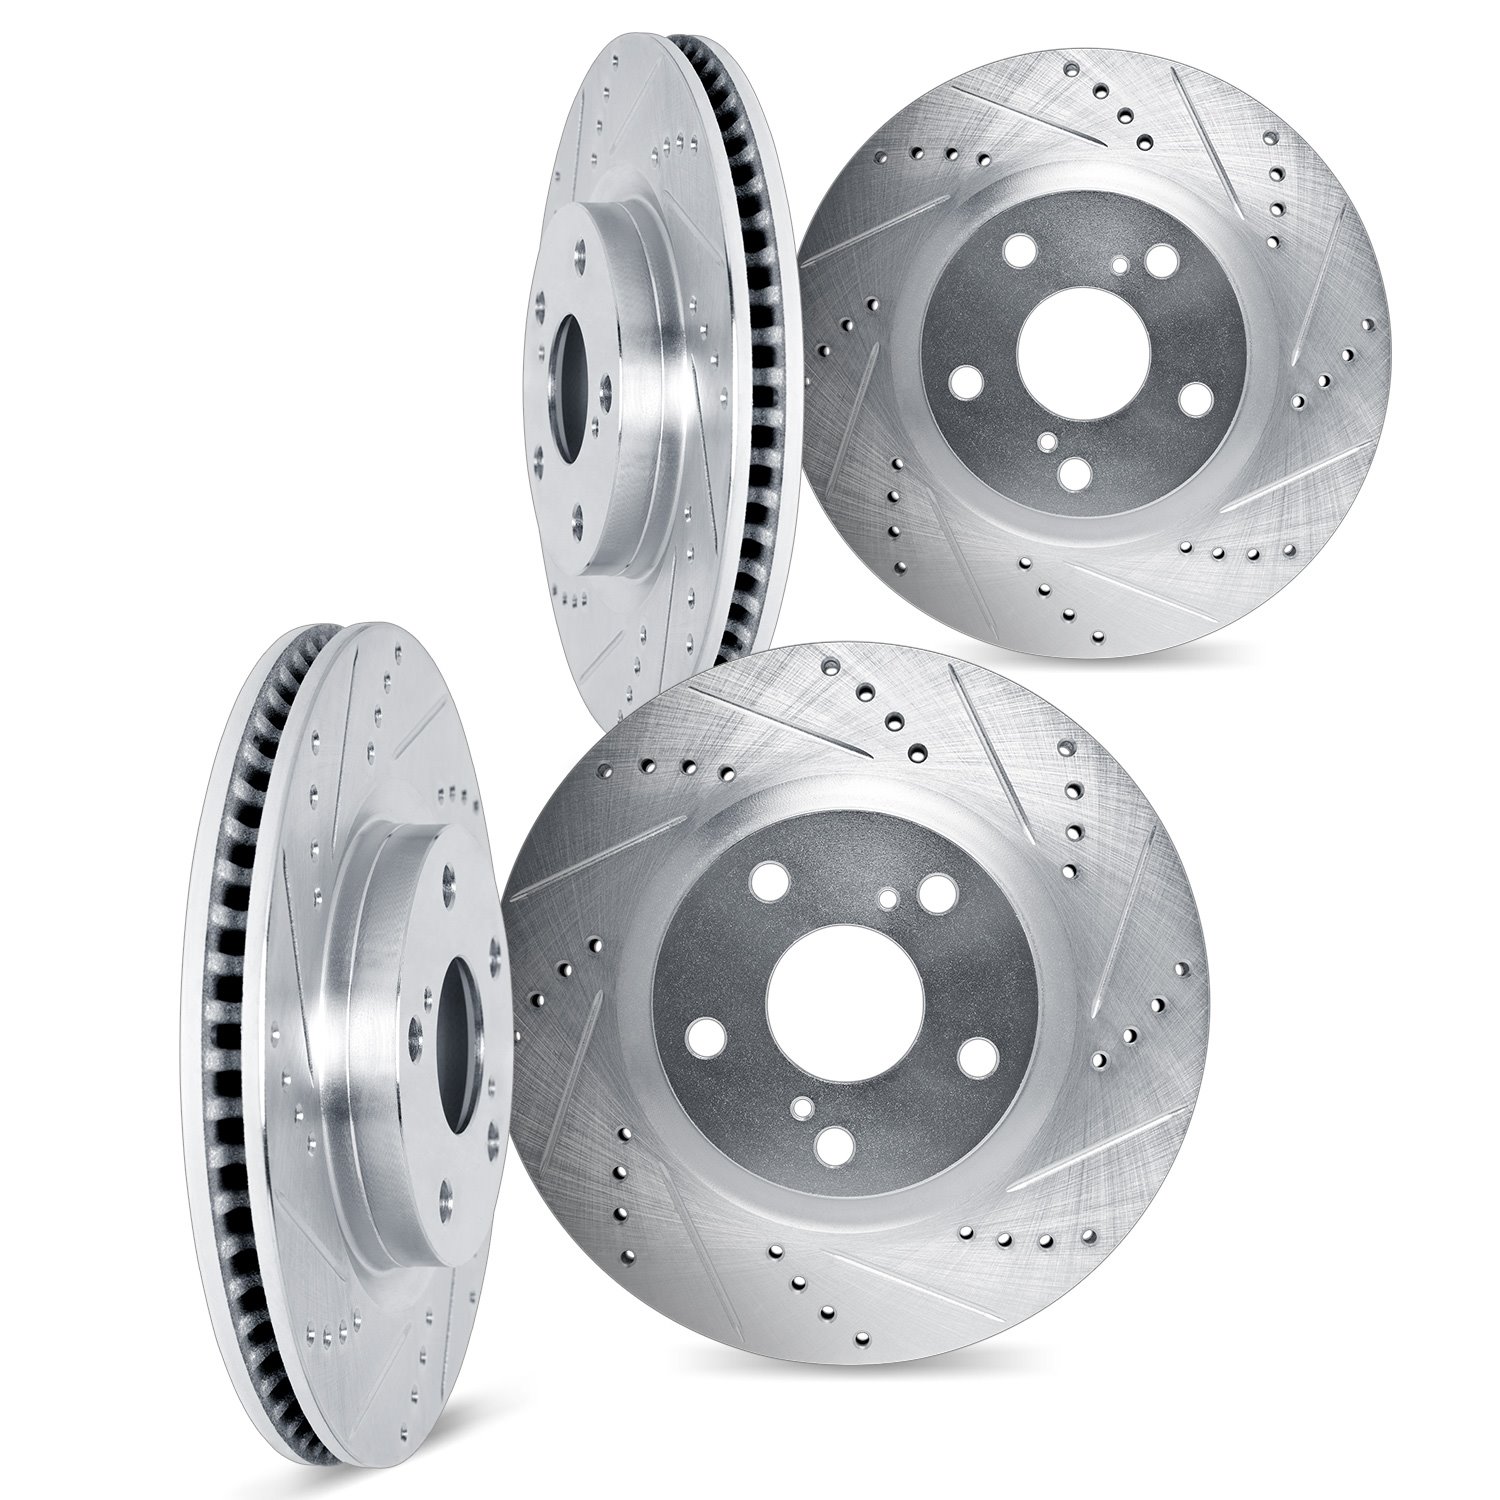 7004-39043 Drilled/Slotted Brake Rotors [Silver], Fits Select Mopar, Position: Front and Rear